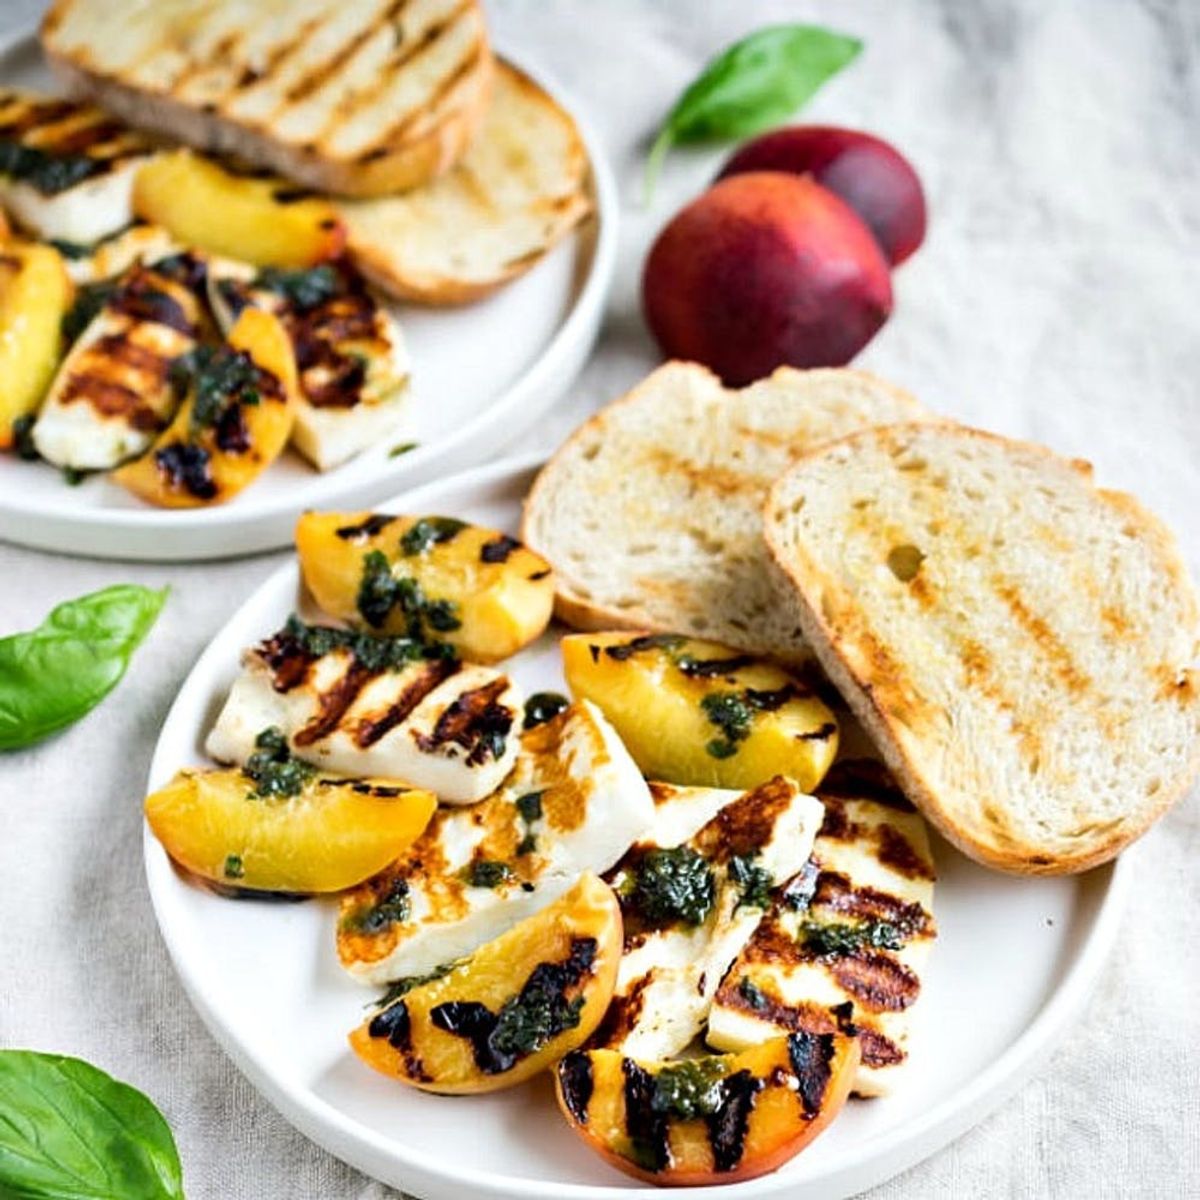 Make Meatless Monday *Extra* Peachy With These 13 Recipes